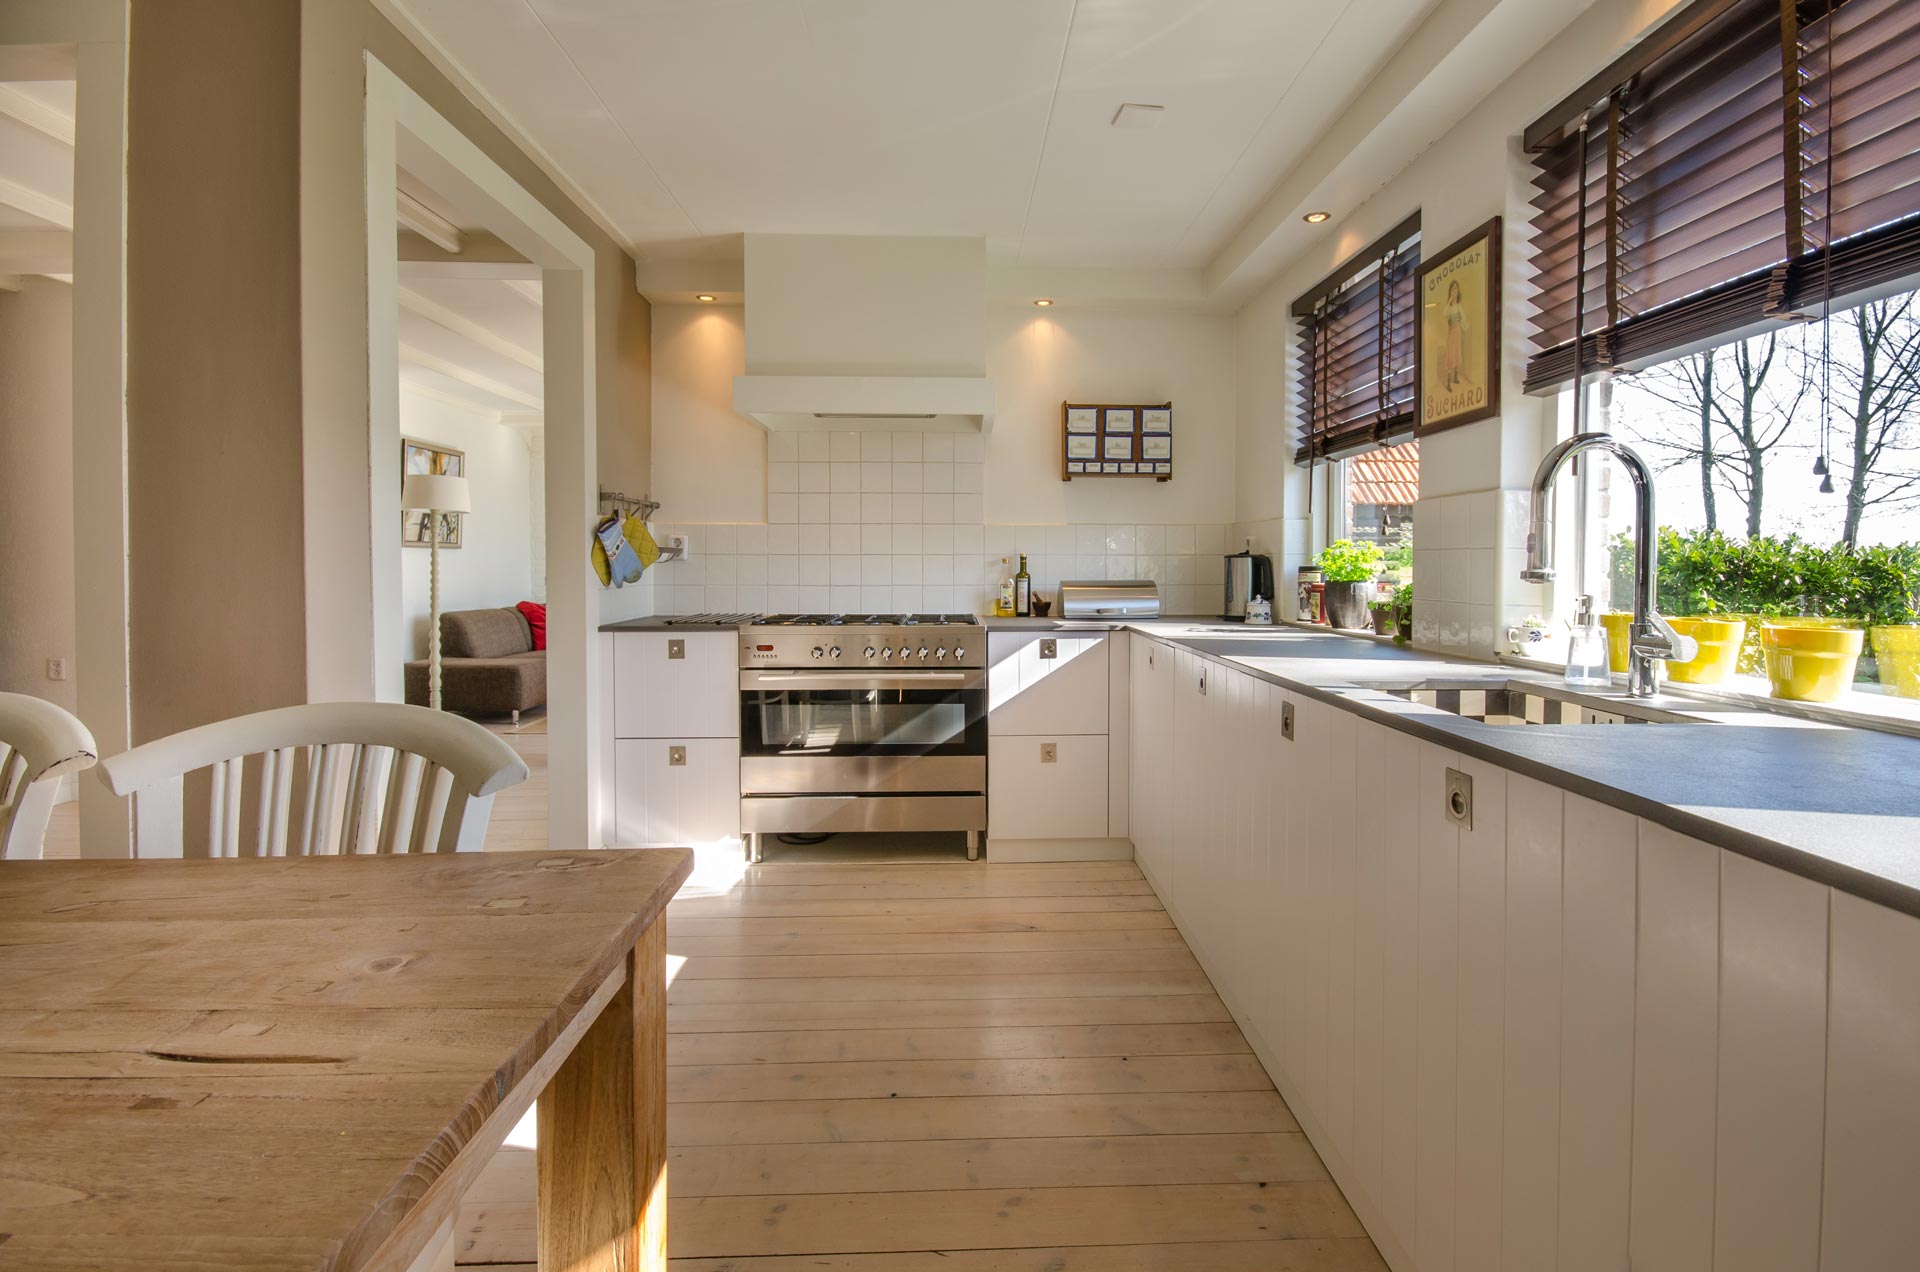 Immaculately clean kitchen with sunlight pouring in through open windows